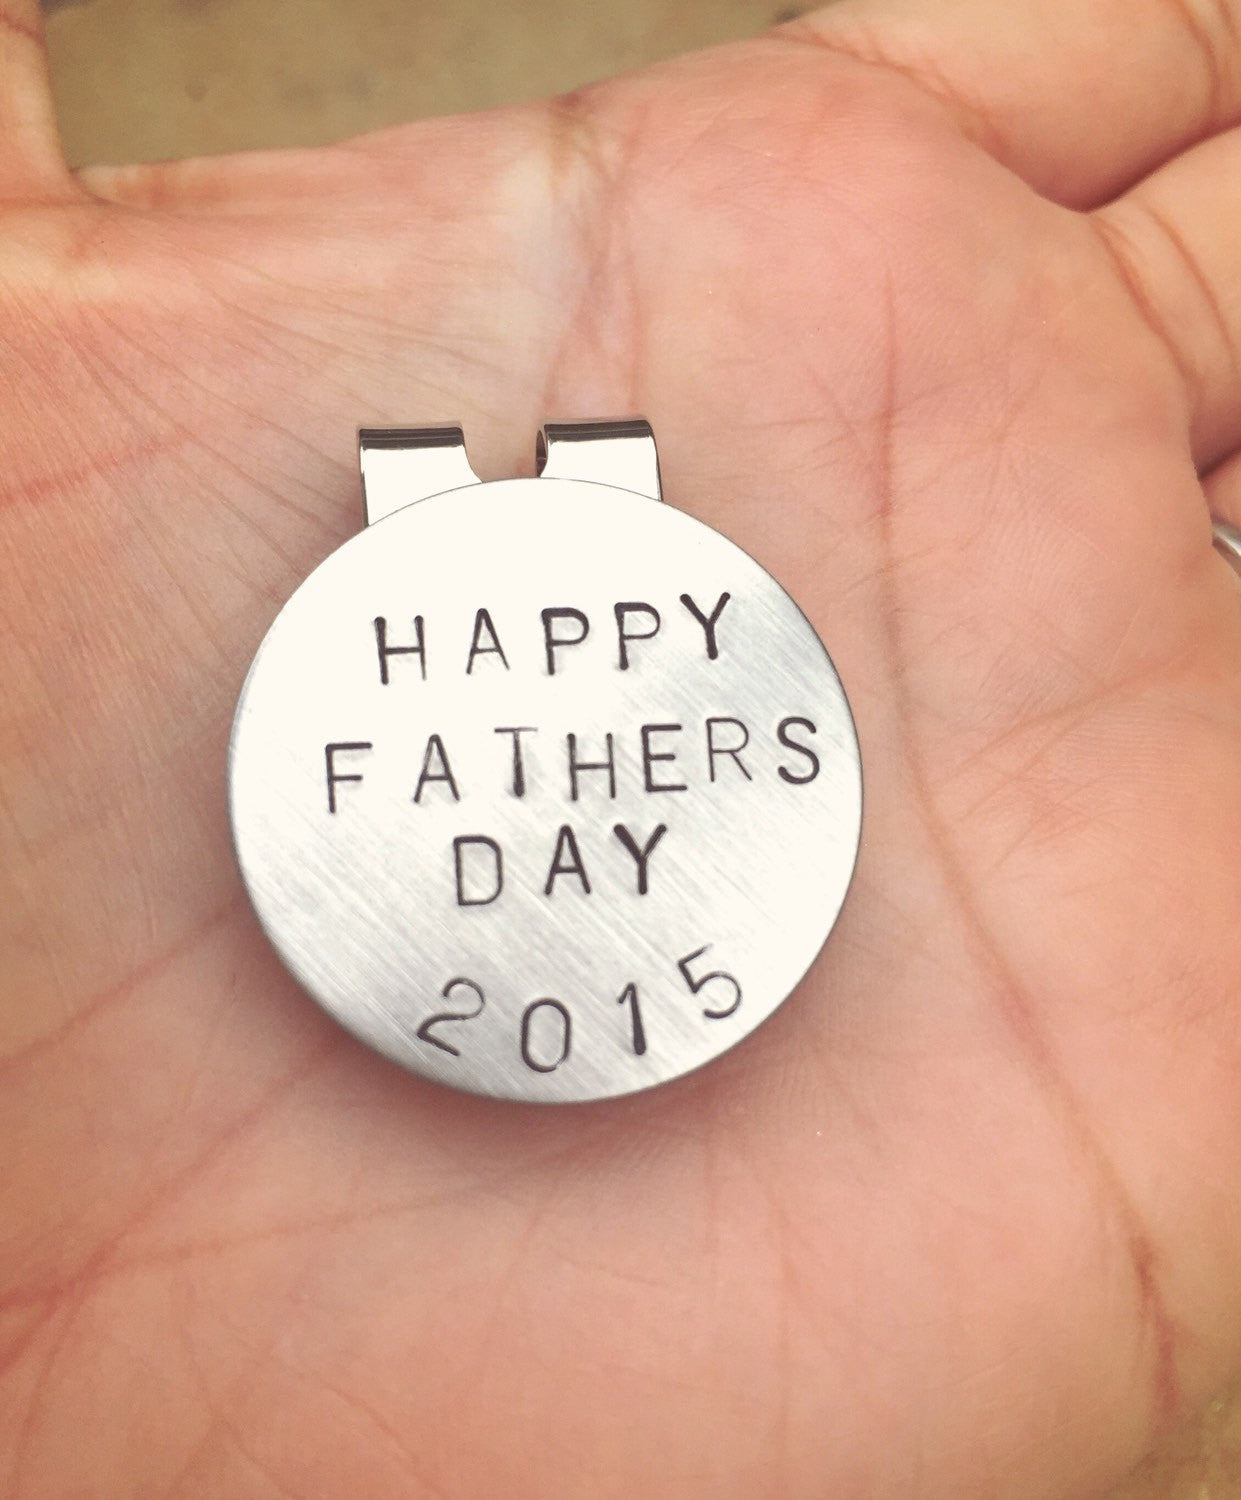 Husband Gift, Golf Marker, Boyfriend Gifts, Golf Gifts, Personalized Golf Marker, Hat Clip, Gifts for Dad, natashaaloha - Natashaaloha, jewelry, bracelets, necklace, keychains, fishing lures, gifts for men, charms, personalized, 